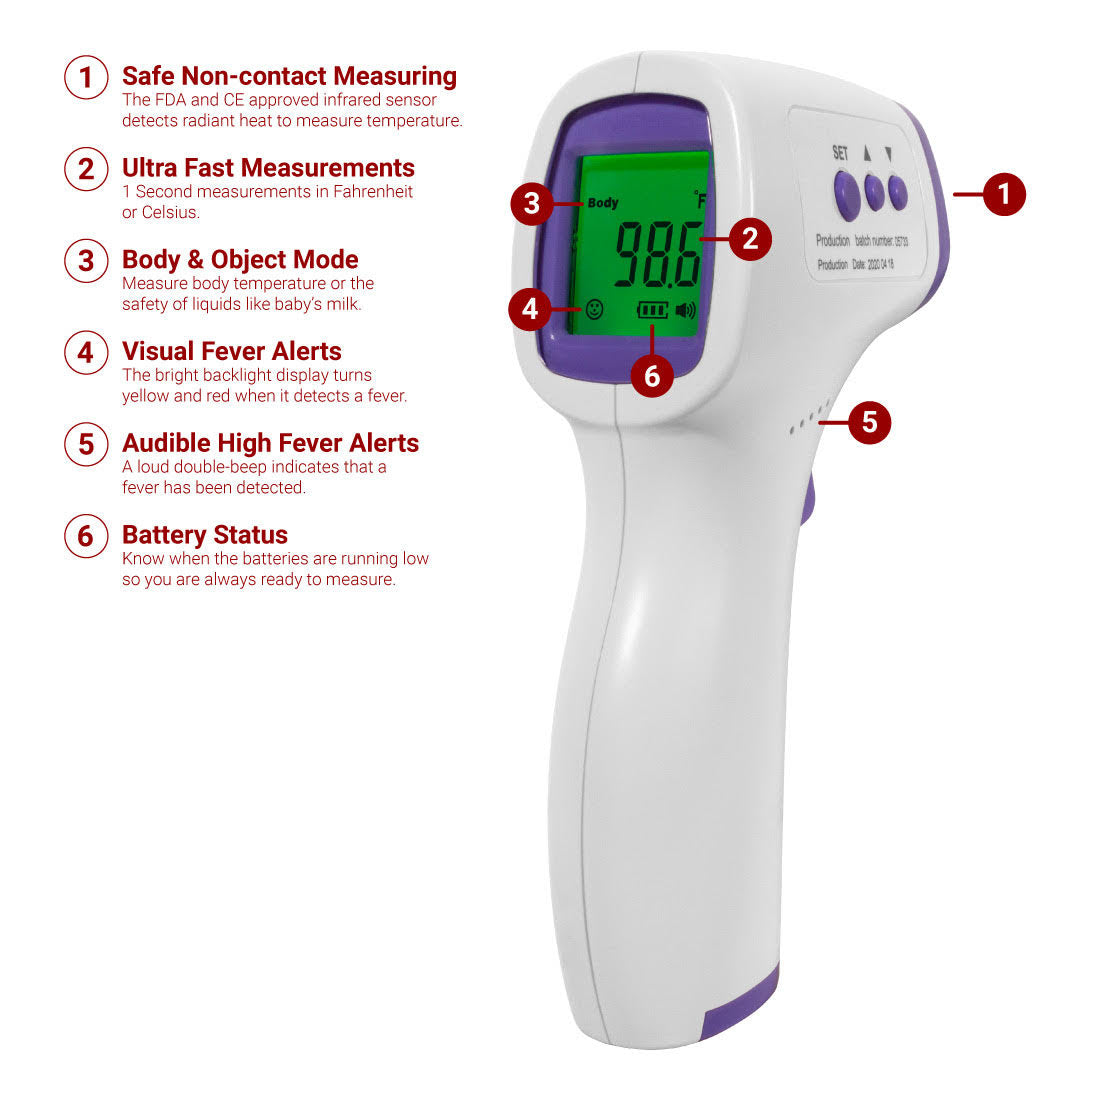 Non-contact Infrared Forehead Thermometer-Thermometer-Lawson Screen & Digital Products Lawson Screen & Digital Products dtf printer screen printing direct to fabric equipment machine printers equipment dtg printer screen printing direct to garment equipment machine printers